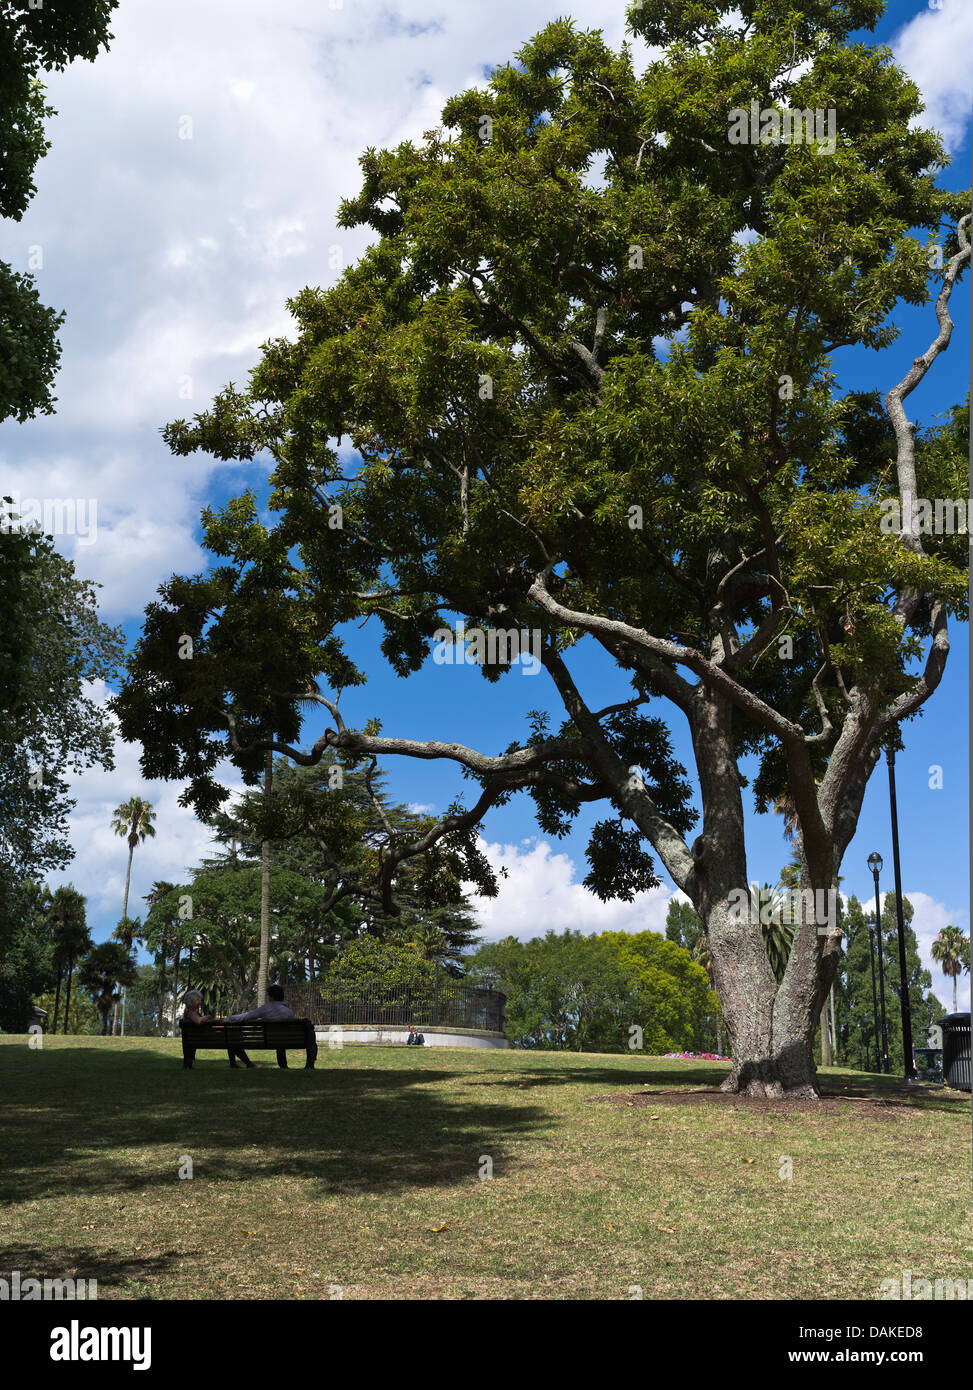 dh Albert Park AUCKLAND NEW ZEALAND People sitting on bench relaxing shaded tree Stock Photo